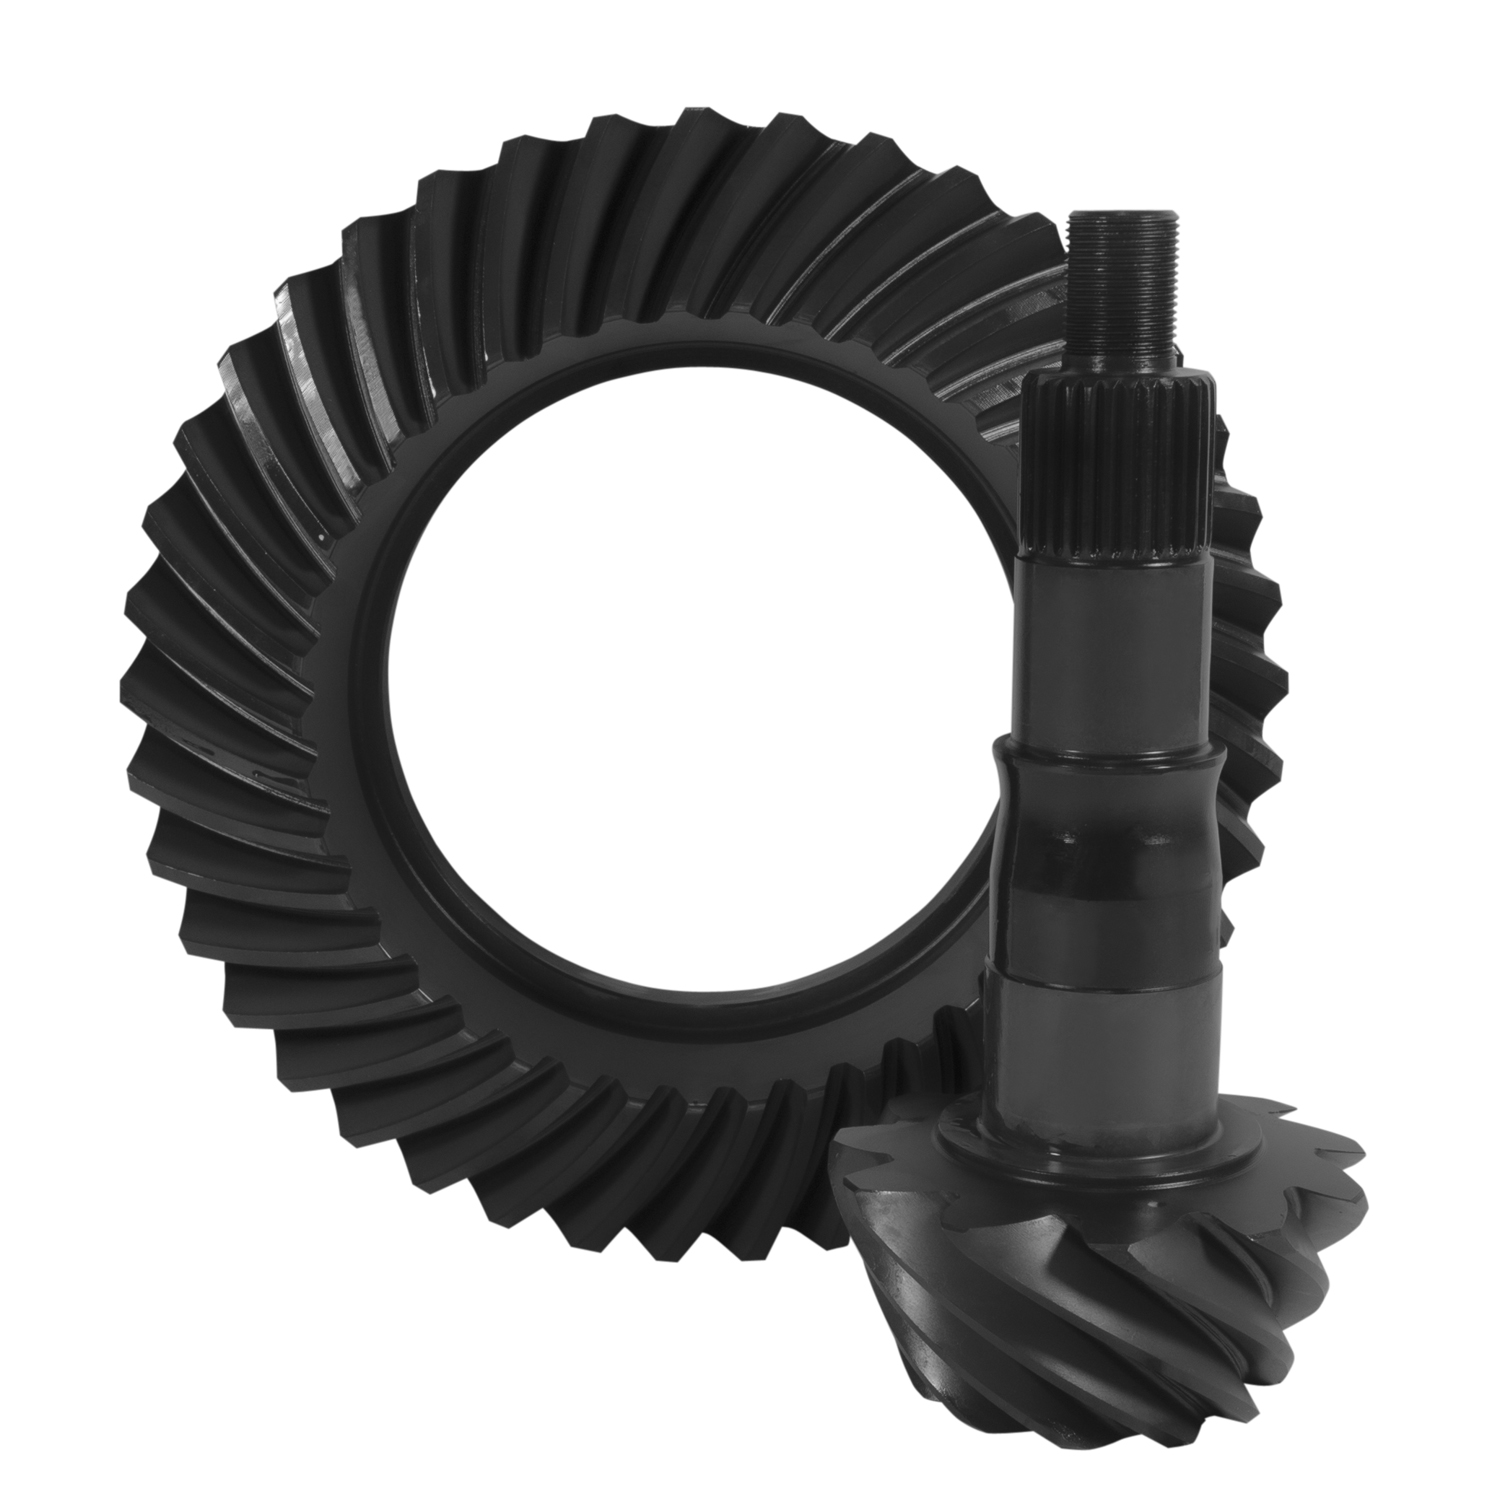 USA Standard Ring & Pinion gear set for Ford 8.8" in a 3.31 ratio